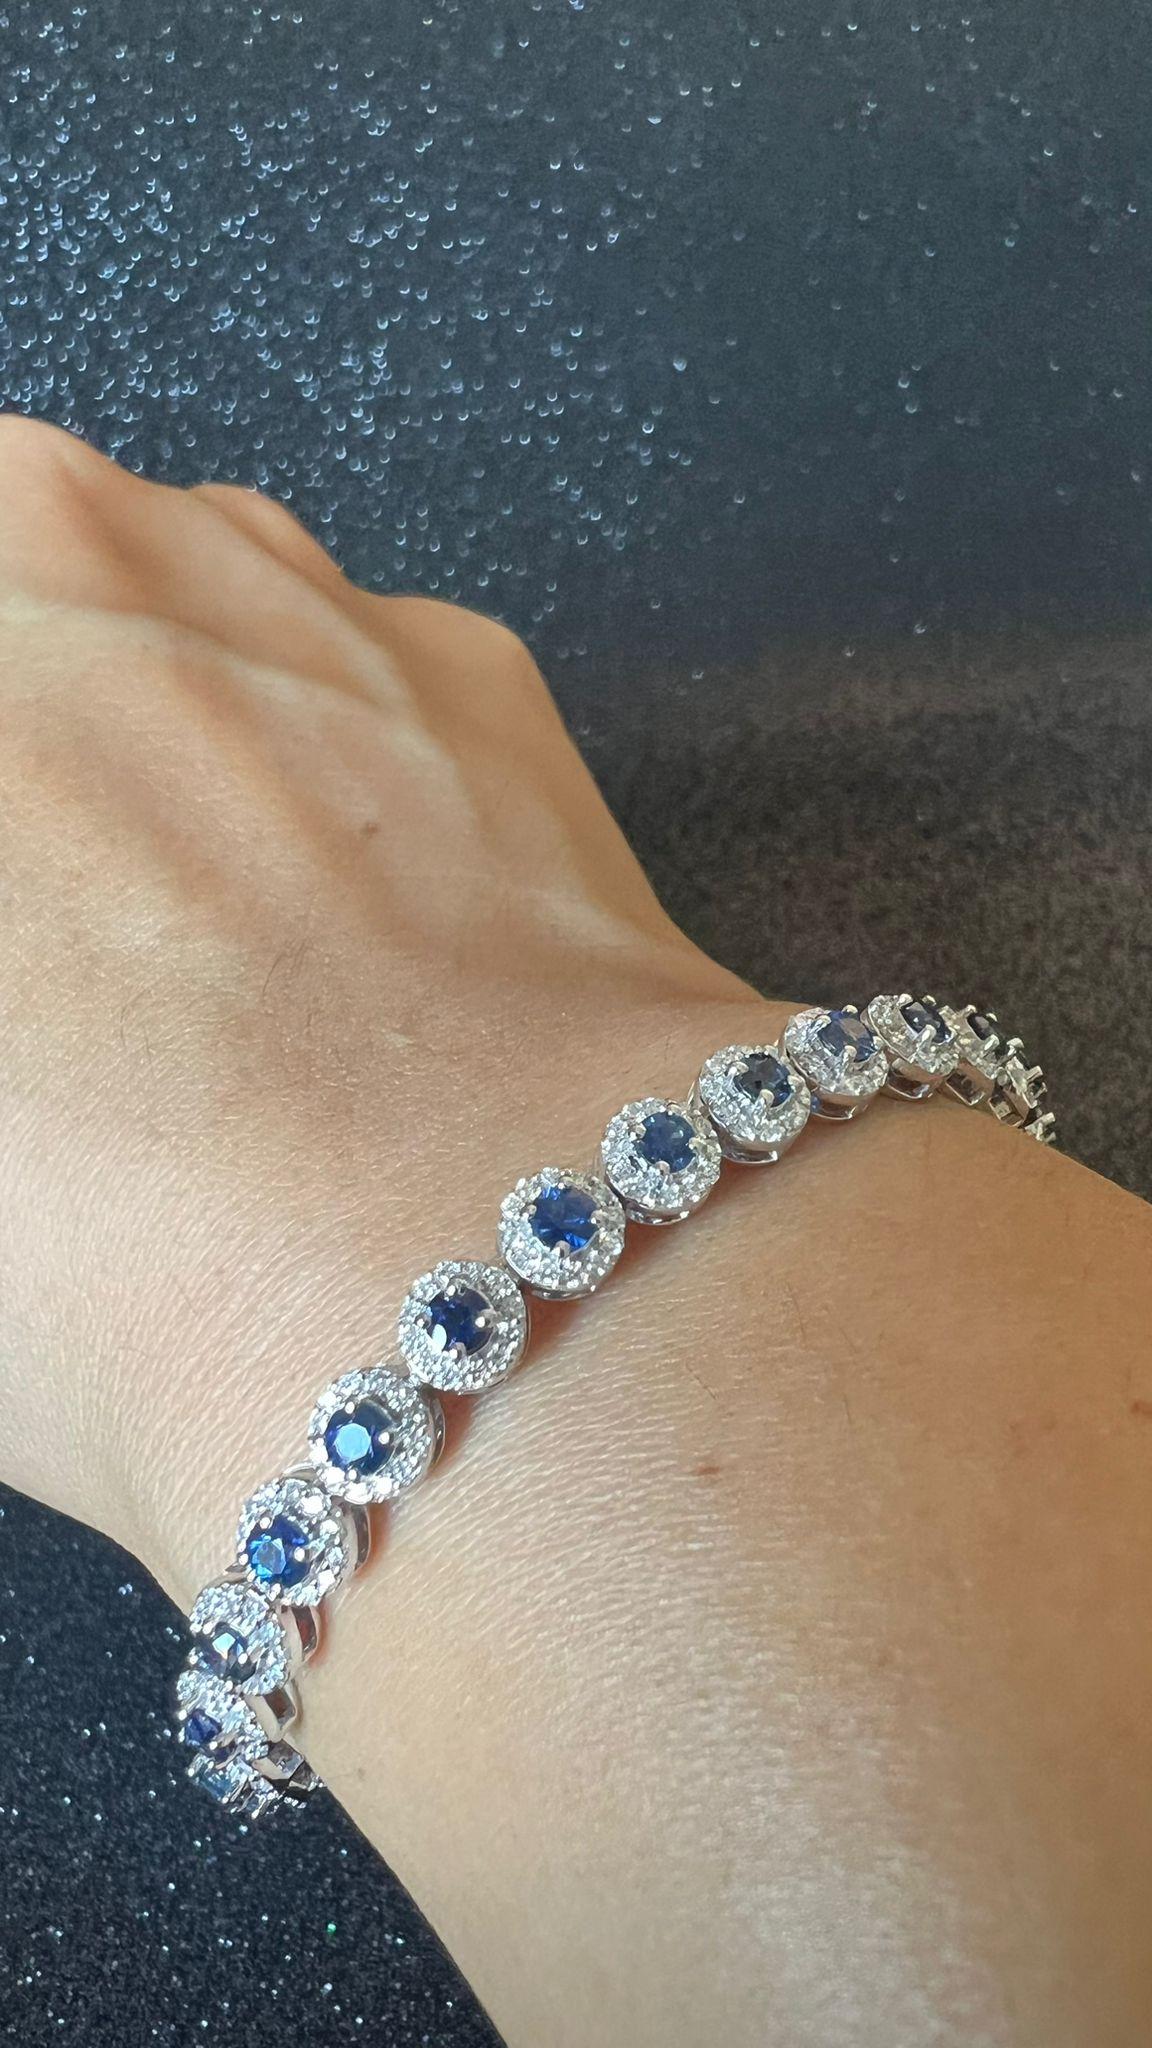 Tennis bracelet with all around diamonds forming a halo over natural blue sapphires
total 7 inch length
Ceylon handpicked 4.20carats of sapphires are used in this bracelet 
1.76 carats of hand picked natural diamonds of VS clarity & FG color is